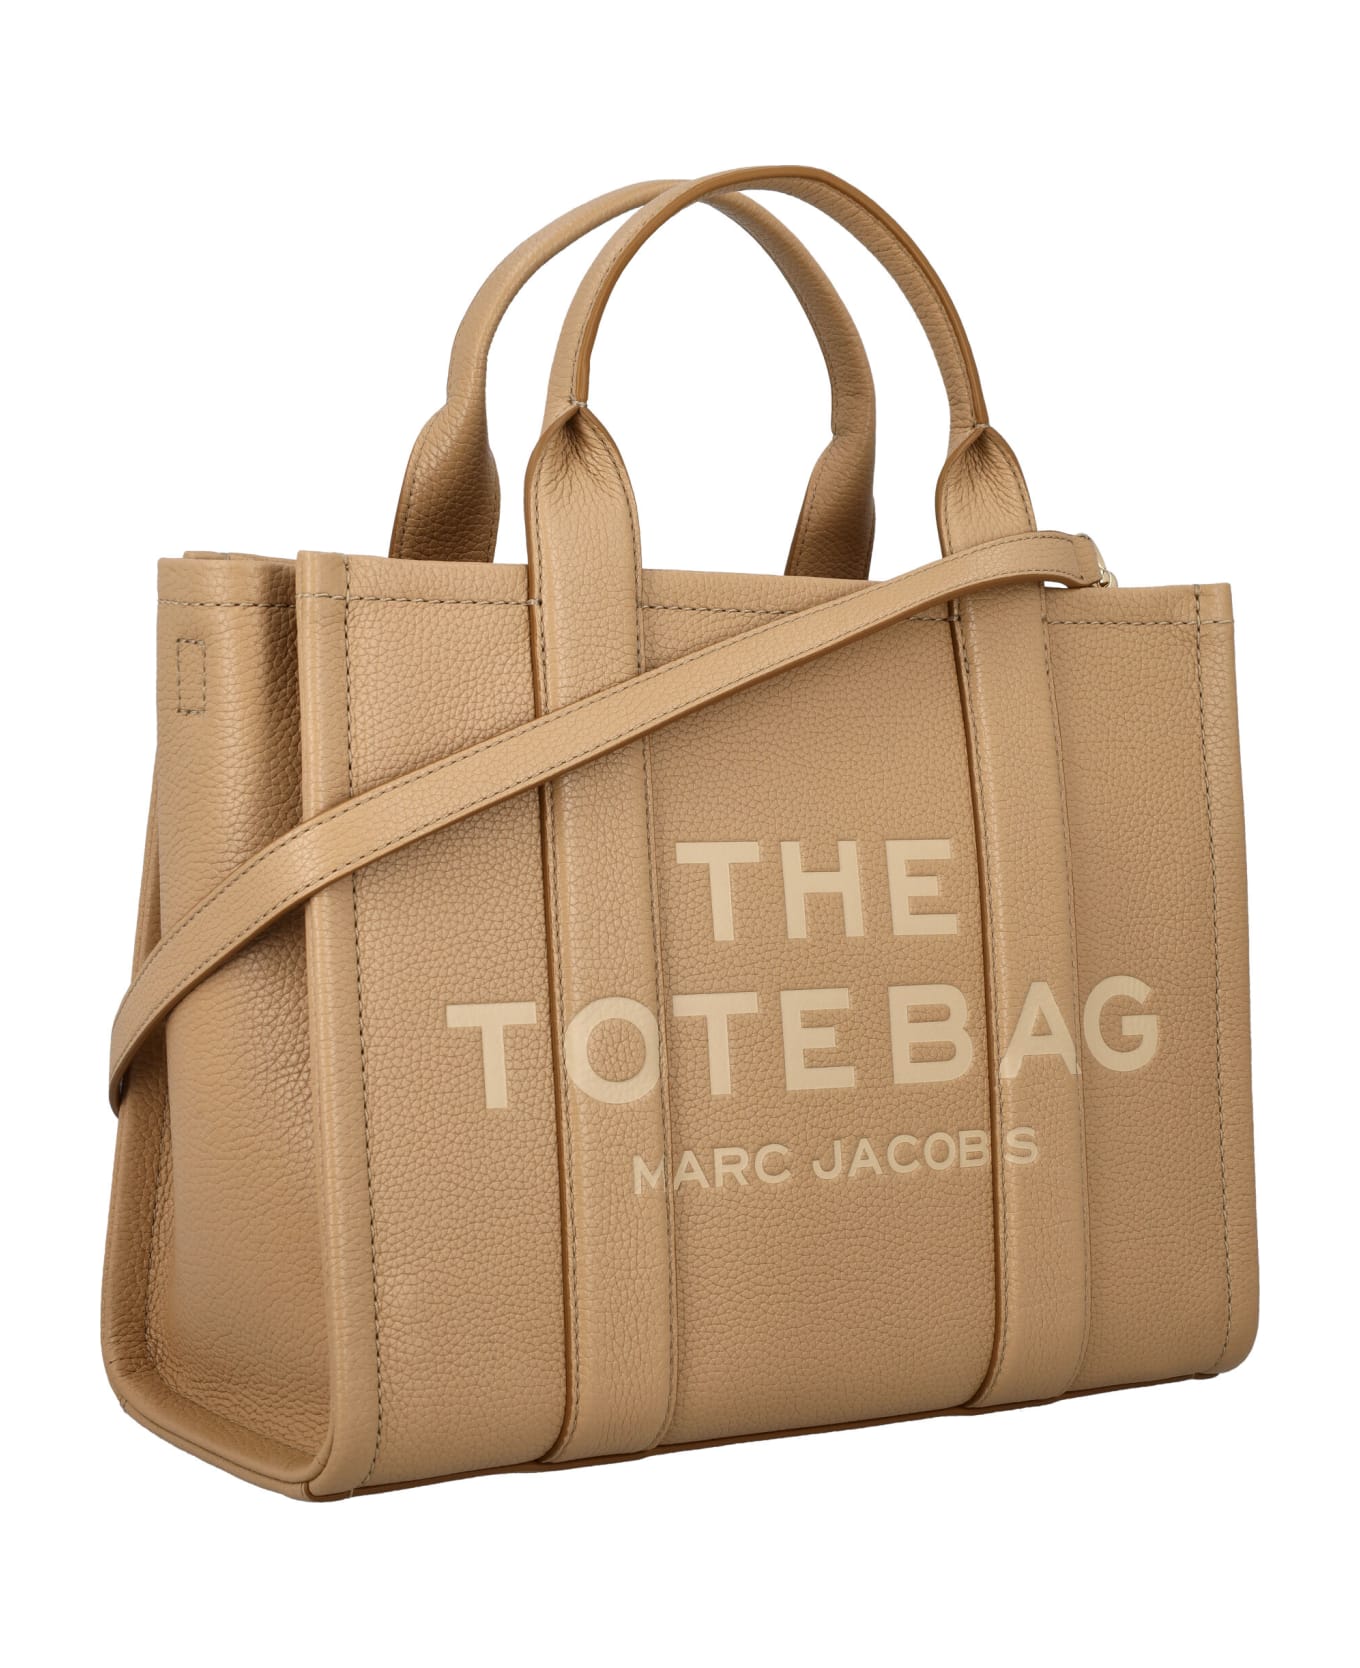 Marc Jacobs The Leather Medium Tote Bag - CAMEL